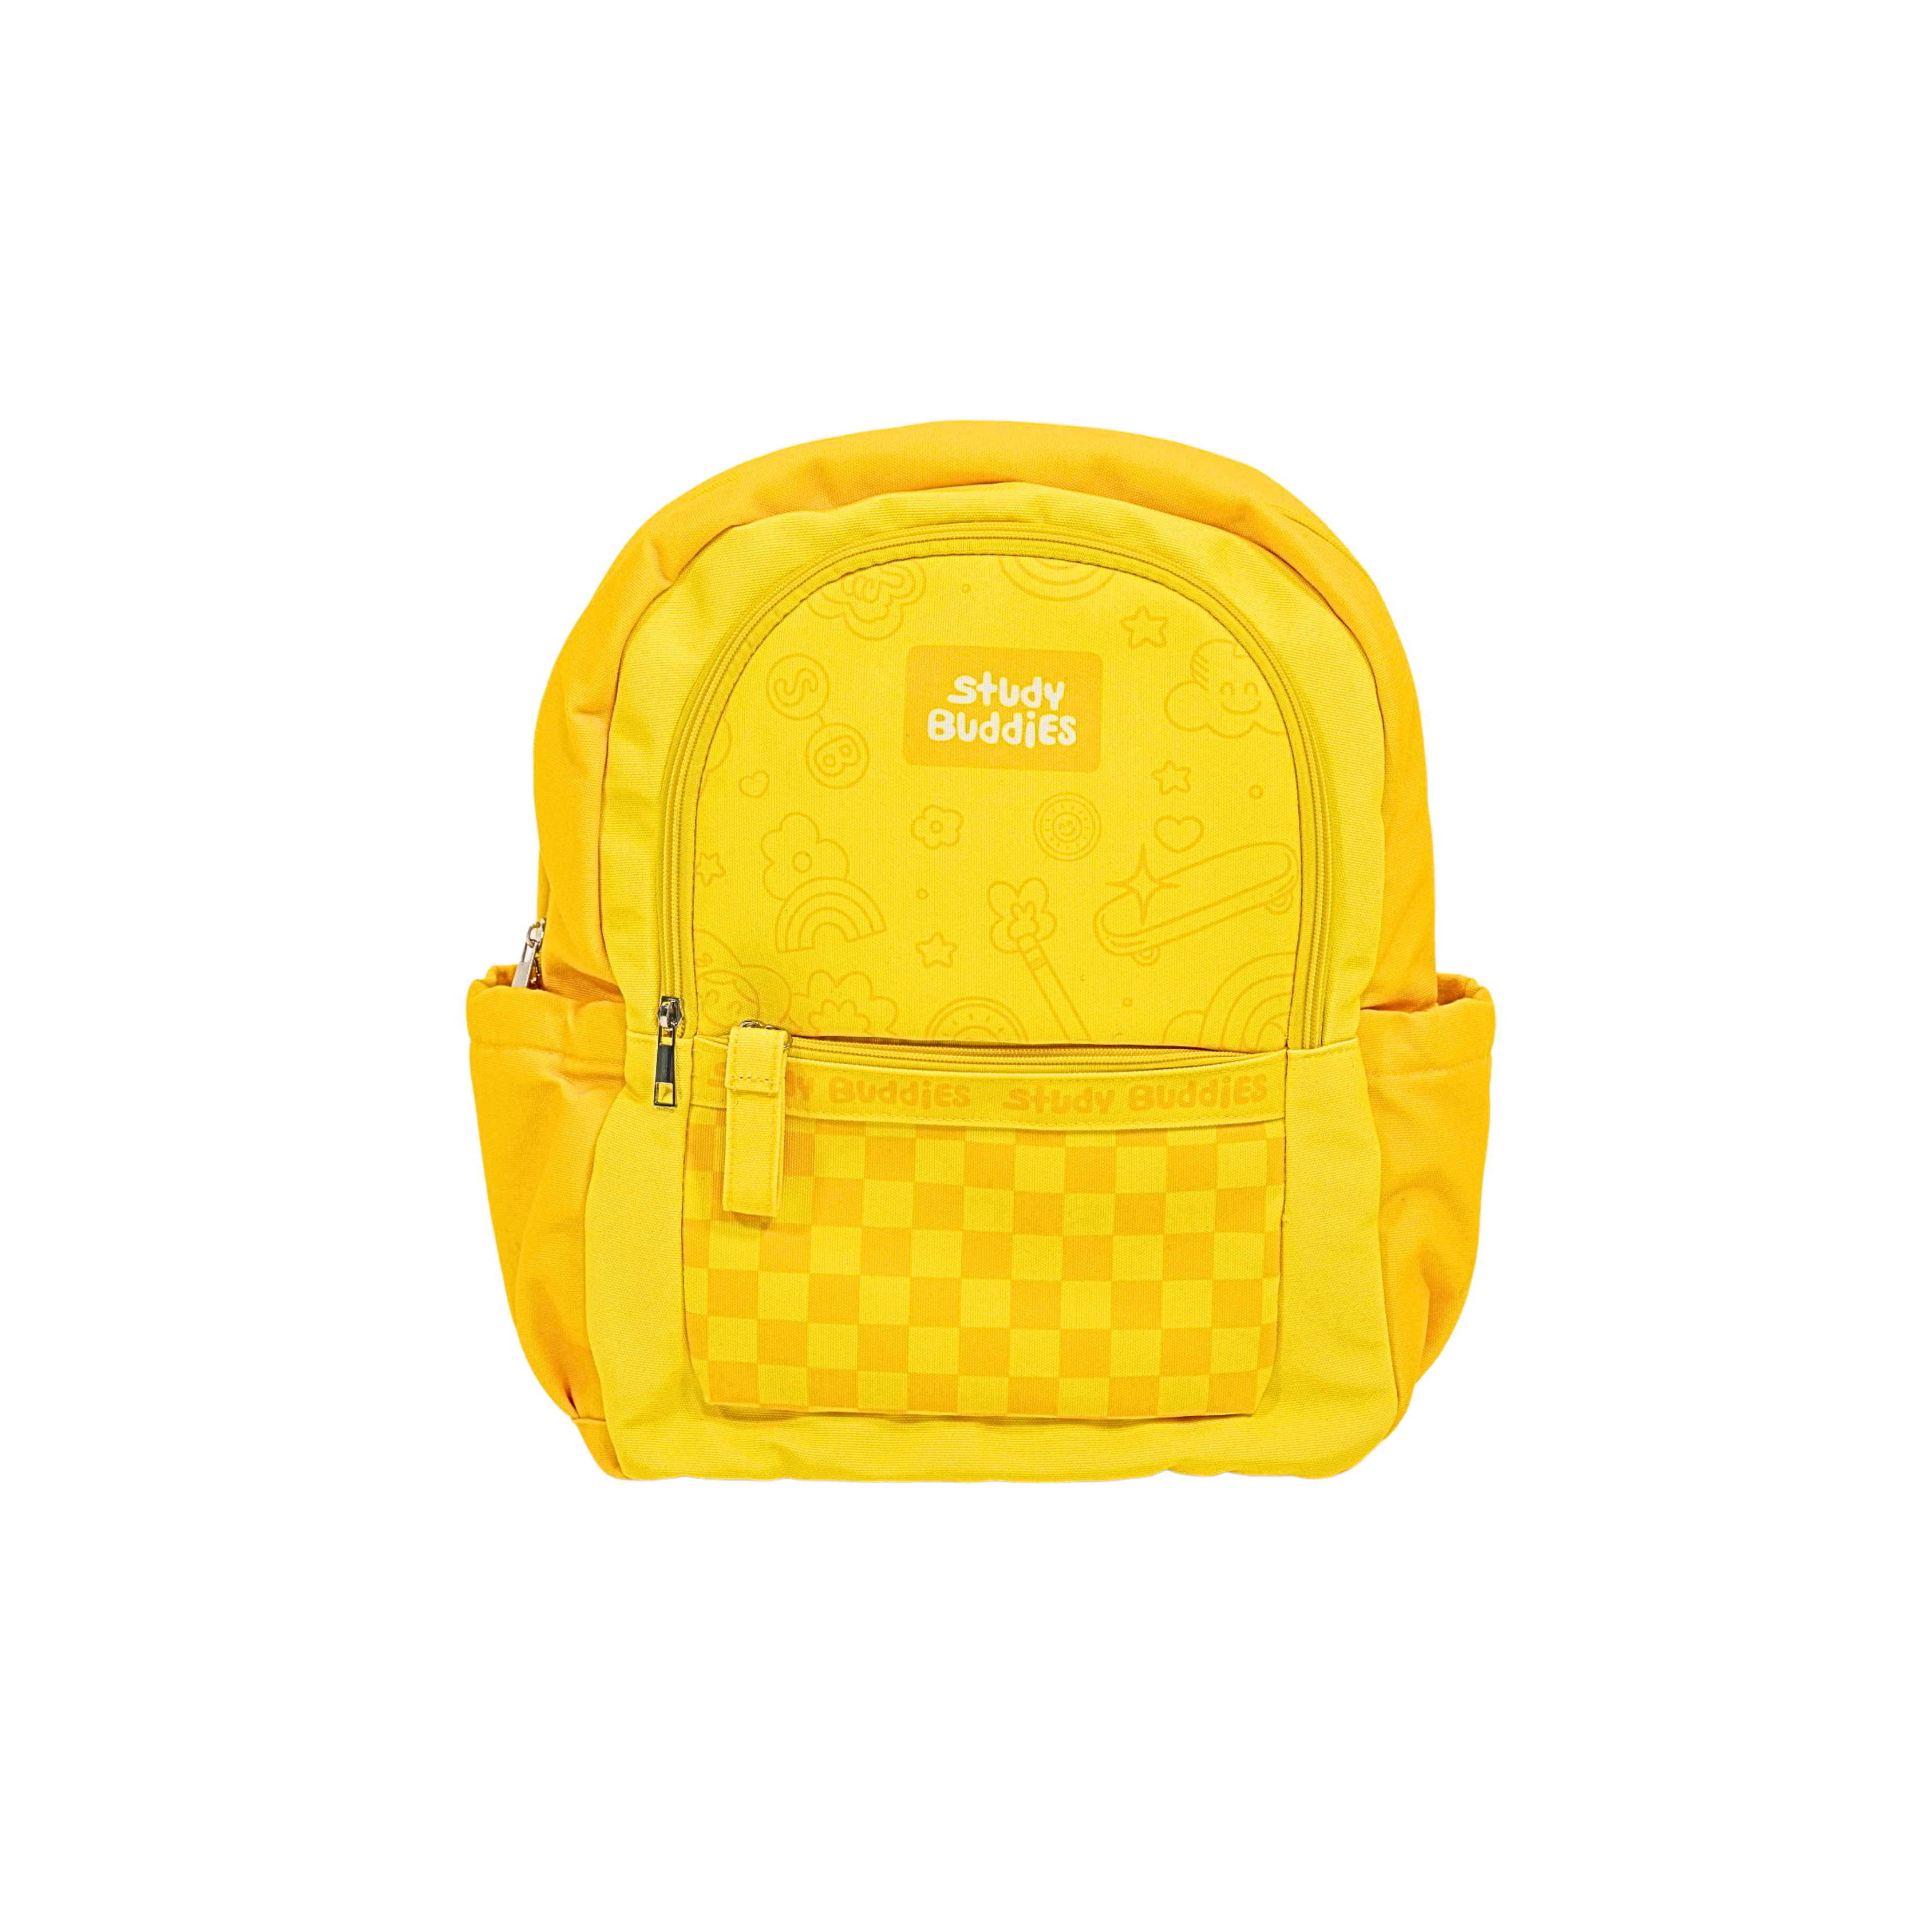 Adventure Buddy Backpack (Yellow)

"Bring out the adventurer in you with the Adventure Buddy Backpack, your ultimate school sidekick! "